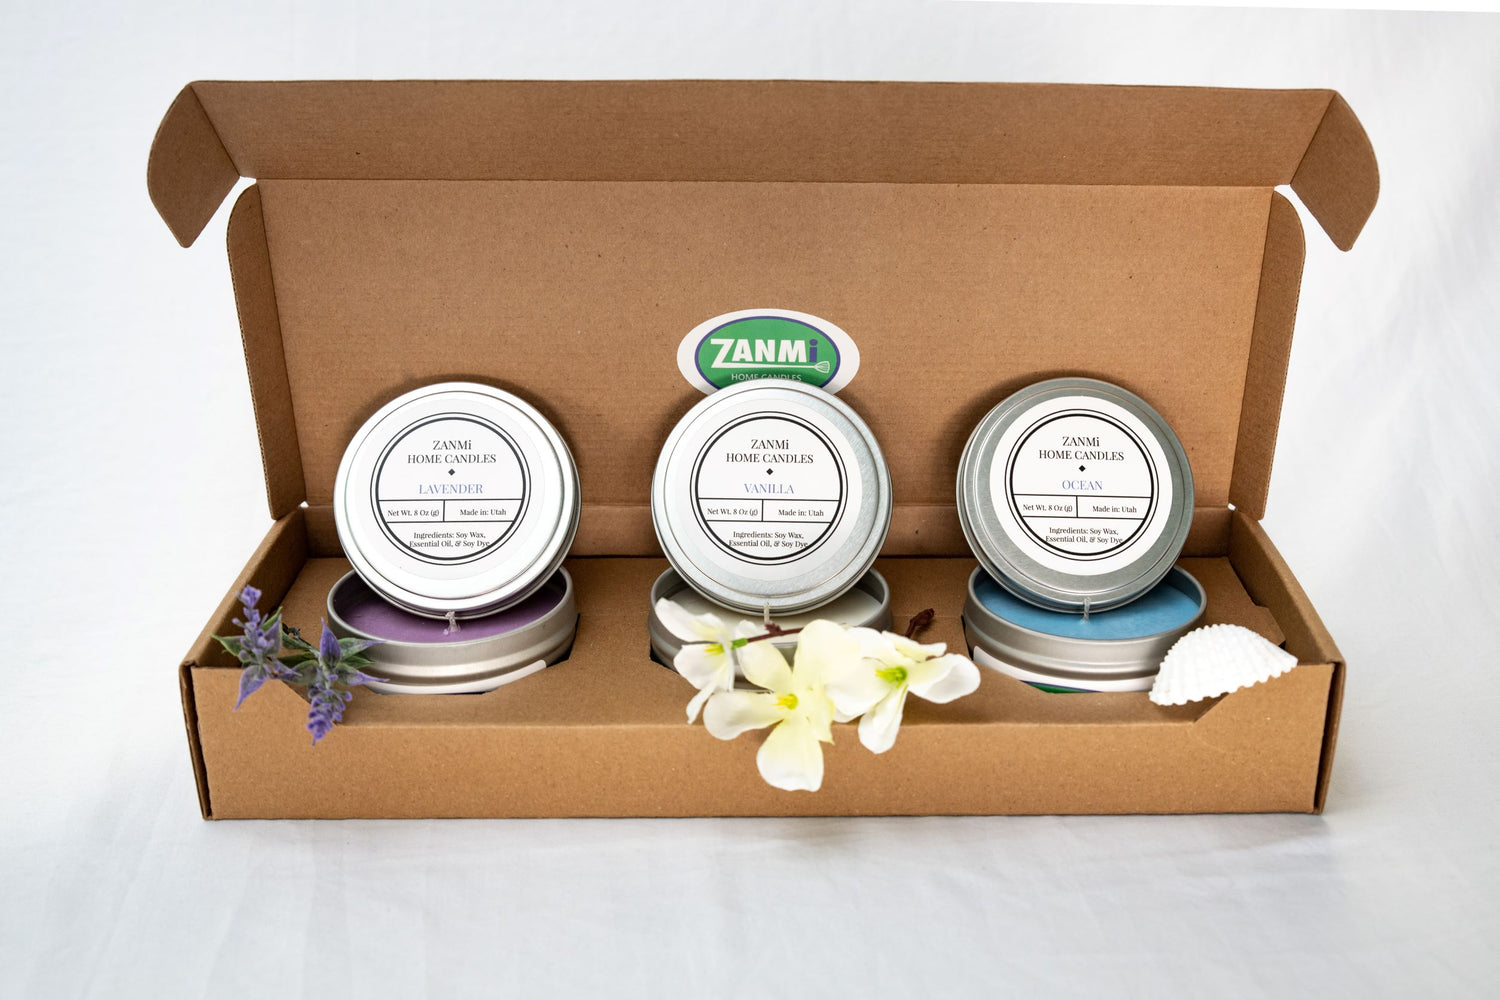 A cardboard box with three handmade soy wax candles and flowers inside.